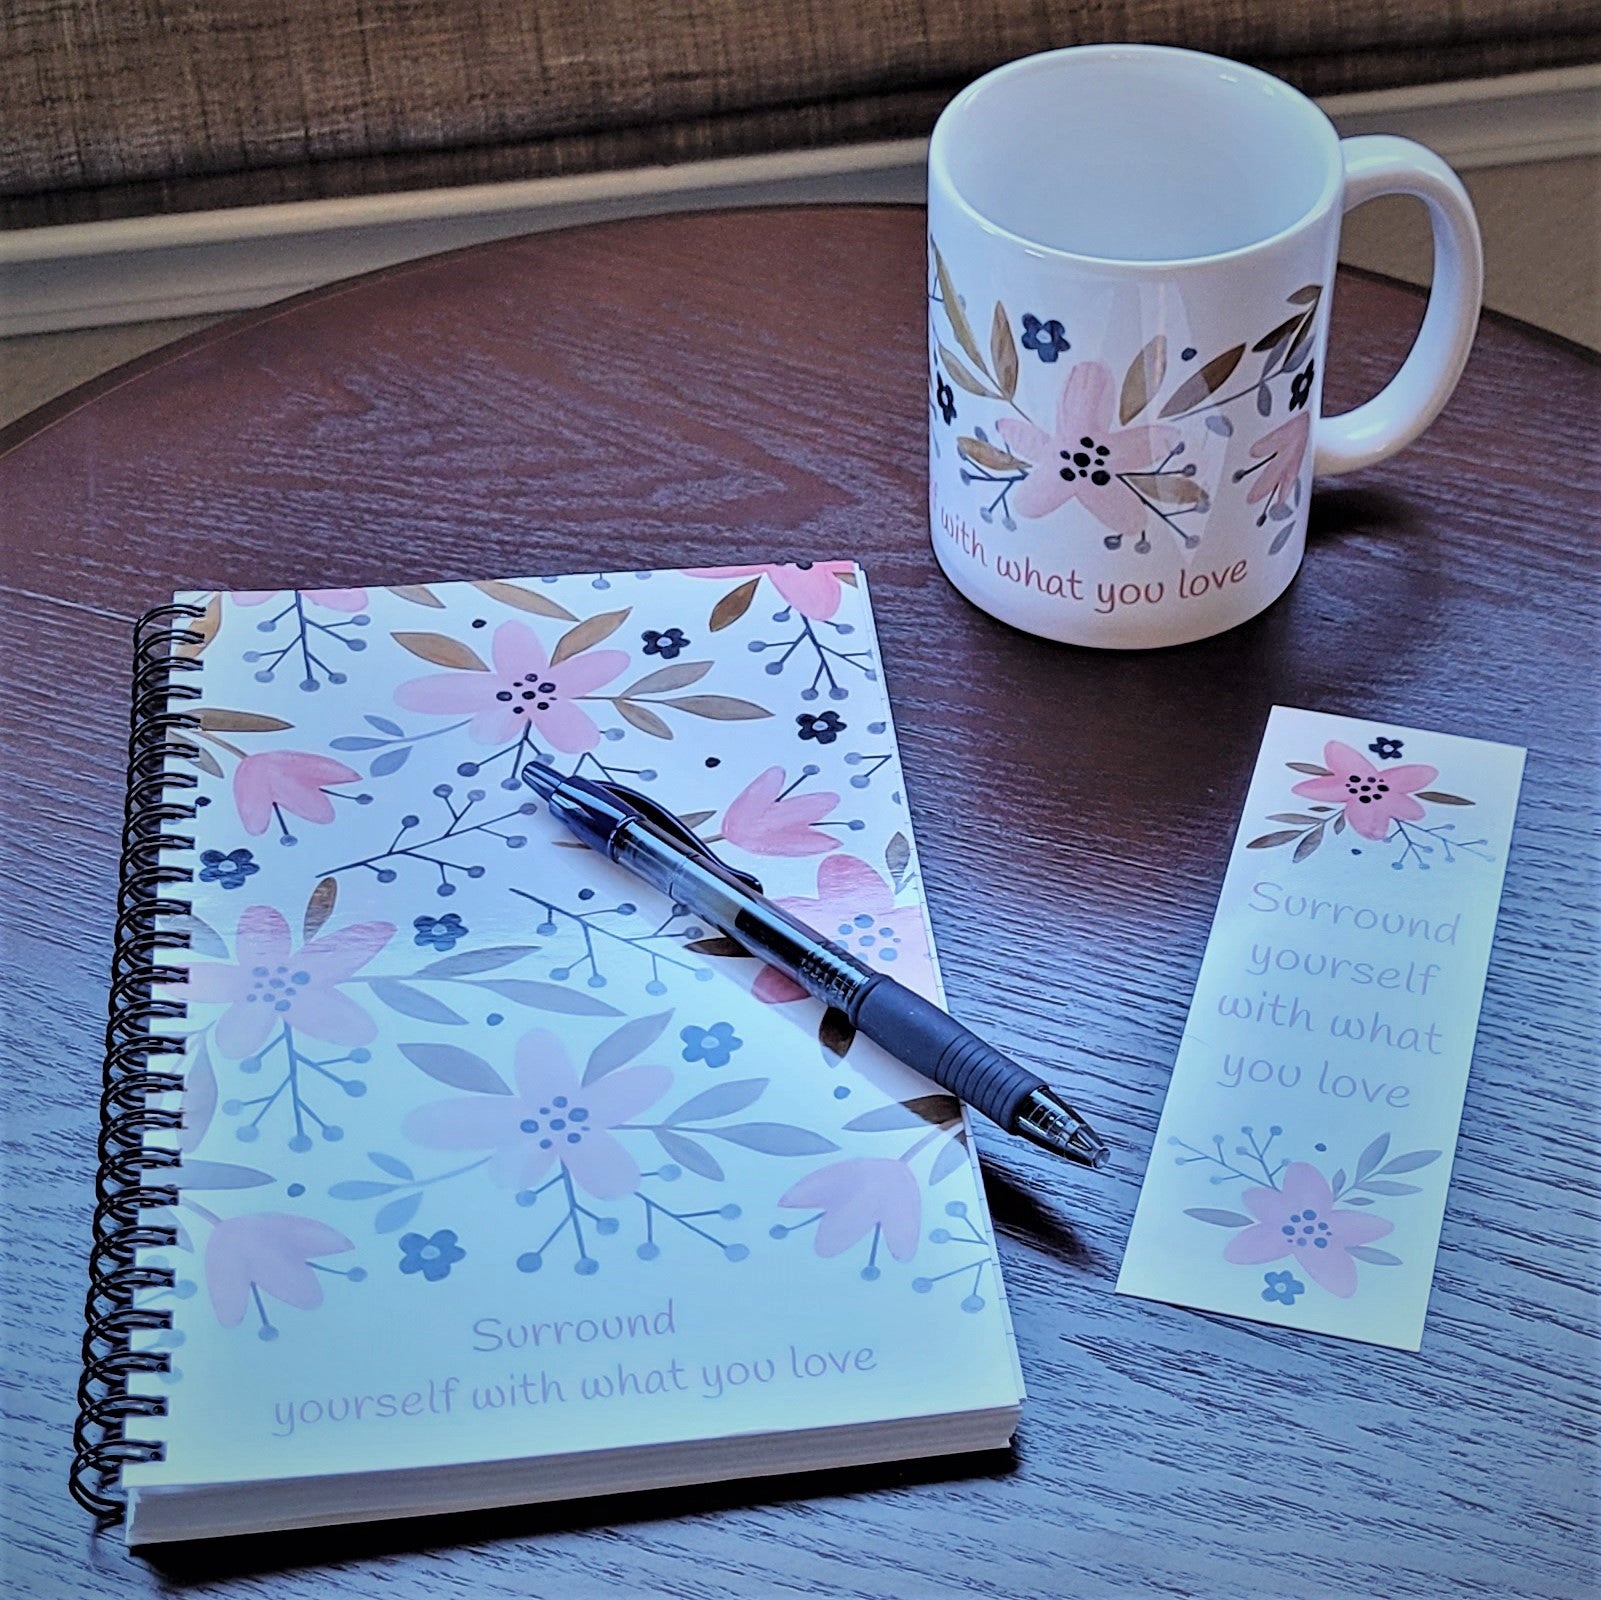 Our exclusive notebook designed in-house has a cute floral print in pinks, tans, and navy blue. The cover reads "Surround yourself with what you love" in a fun pink font. The floral design also decorates the back cover with the words "be a blessing... today, tomorrow, always". | Shown with matching bookmark and pen both FREE with purchase of notebook. | Also pictured with matching Surround yourself with what you love coffee cup - sold separately | oak7west.com